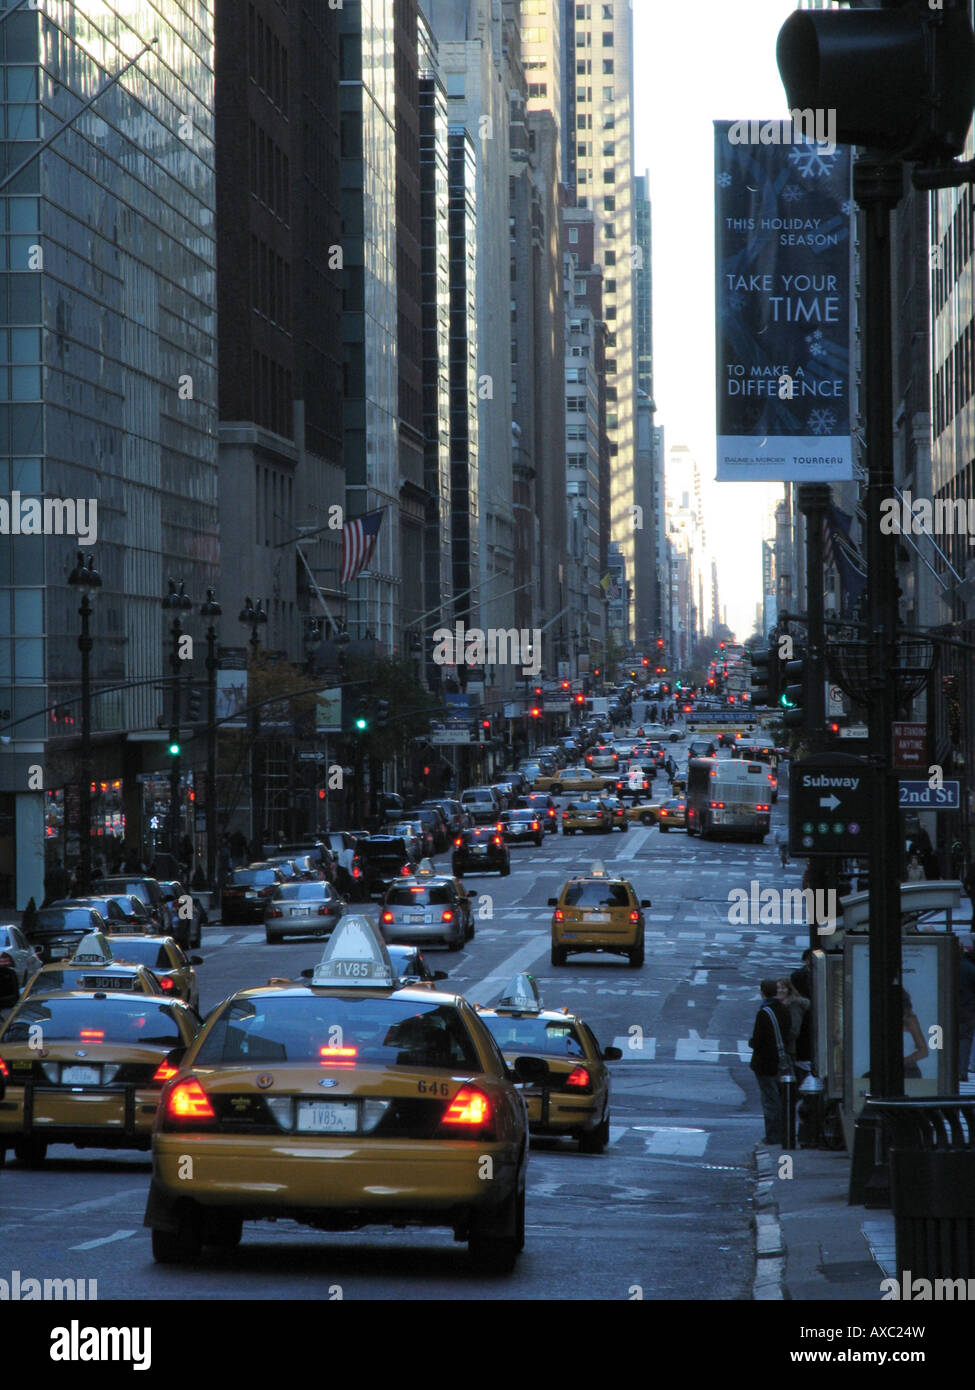 New York taxis in the traffic surrounded by high risers, USA, USA, New York (state) Stock Photo